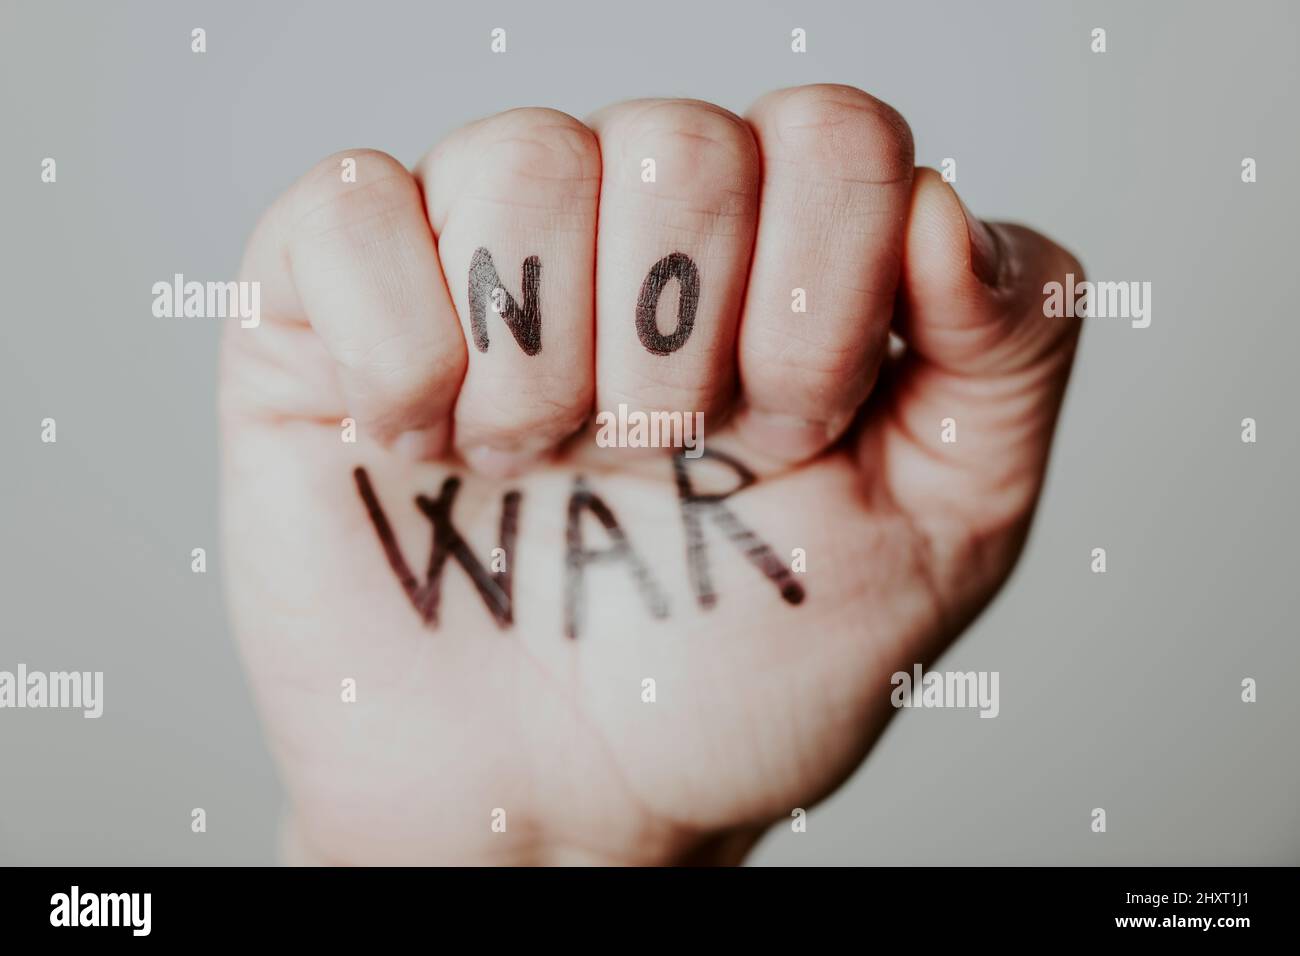 closeup of the raised fist of a man, with the text no war written in it, on a gray background Stock Photo